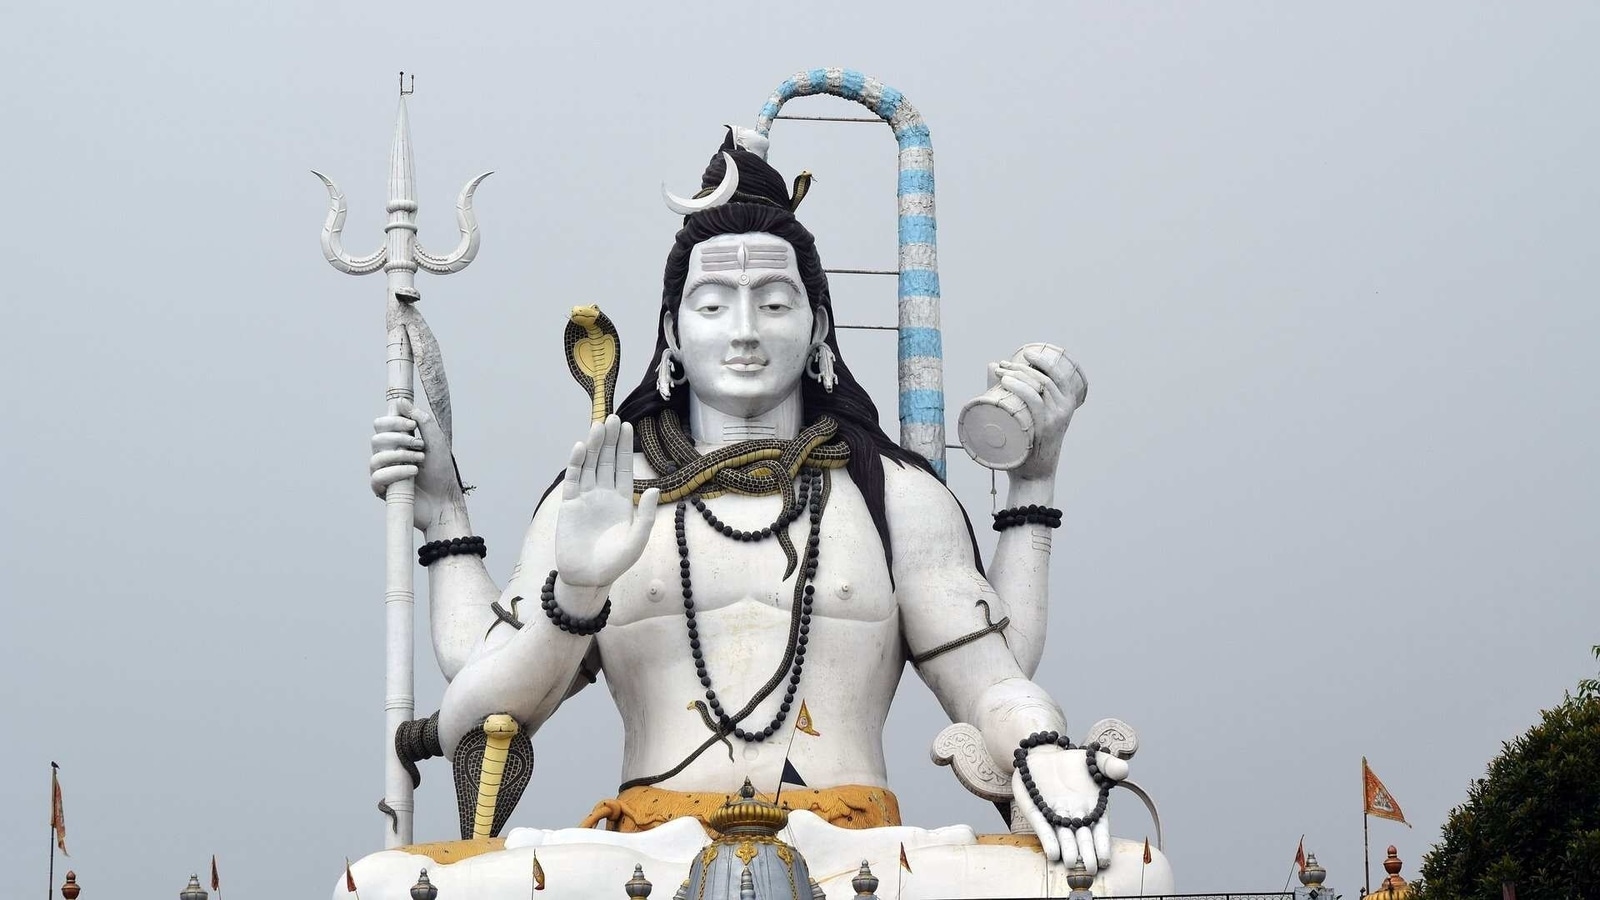 Happy Mahashivratri 2021 HD Images and Wallpapers For Free Download Online:  WhatsApp Sticker Wishes, Maha Shivratri Facebook Messages, Signal Greetings  and Telegram Photos For Friends & Family | 🙏🏻 LatestLY